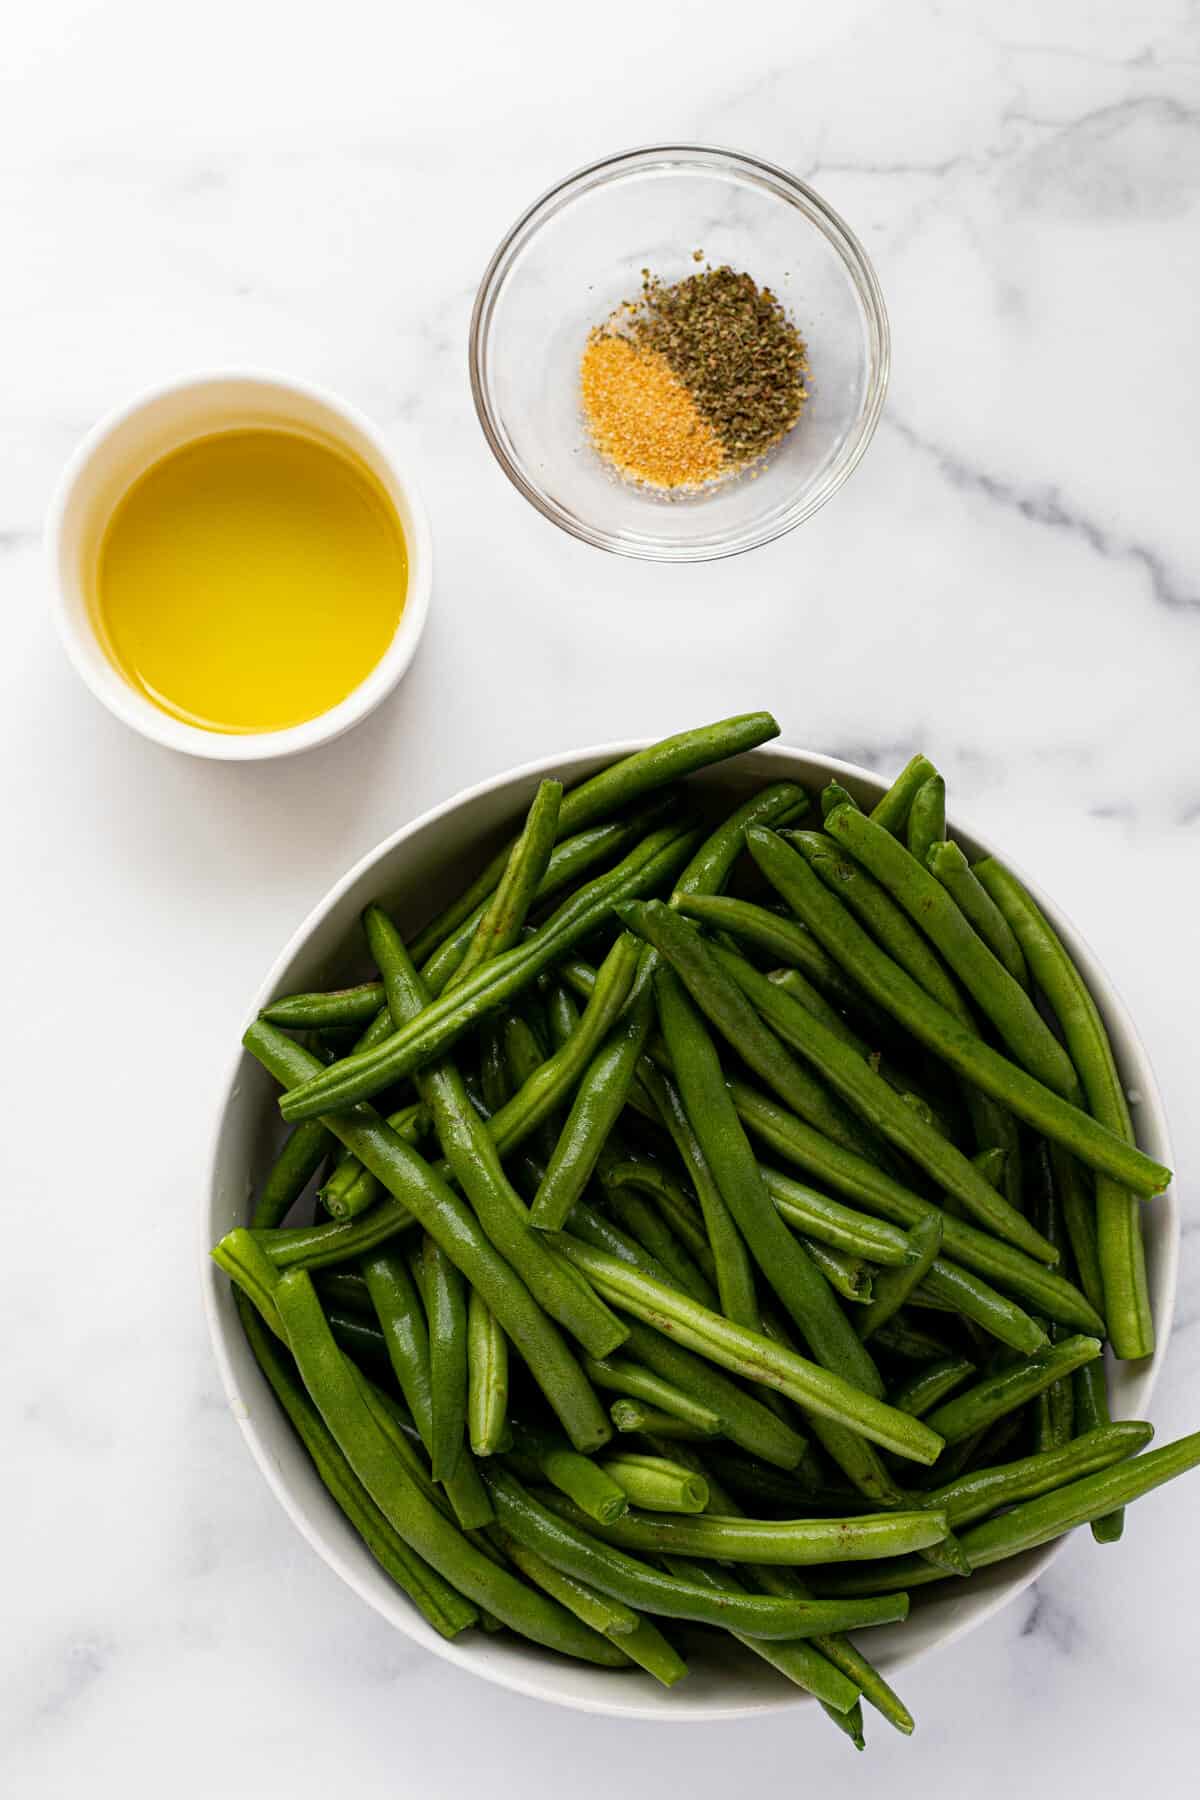 White marble counter top with bowls of ingredients to make air fryer green beans